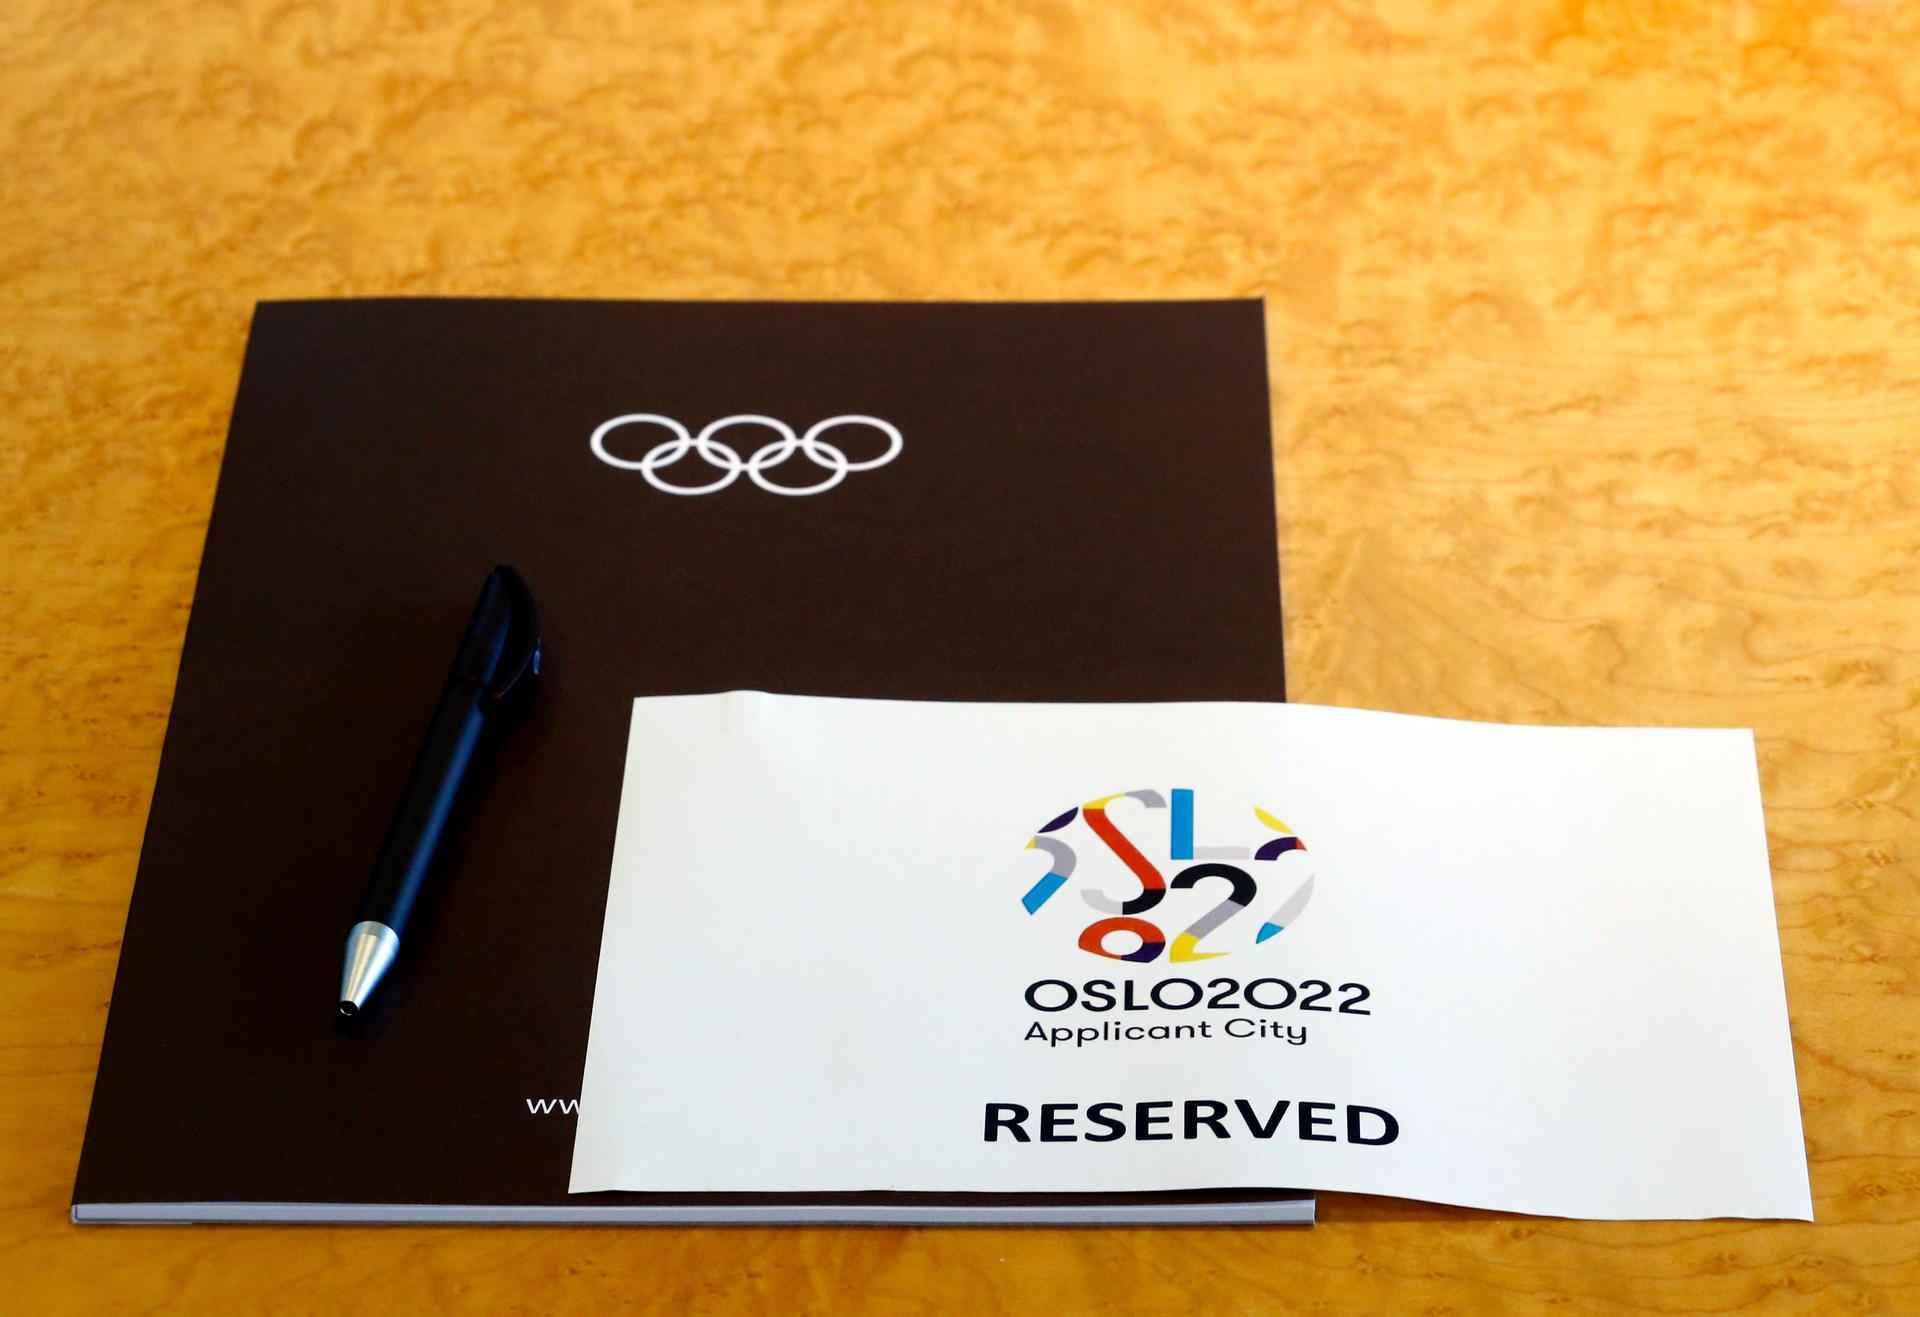 A sign is placed on a table for members of the Oslo 2022 delegation at the start of the Executive Board meeting at the International Olympic Committee (IOC) headquarters in Lausanne July 7, 2014. Oslo withdrew its Olympic bid in October, 2014.